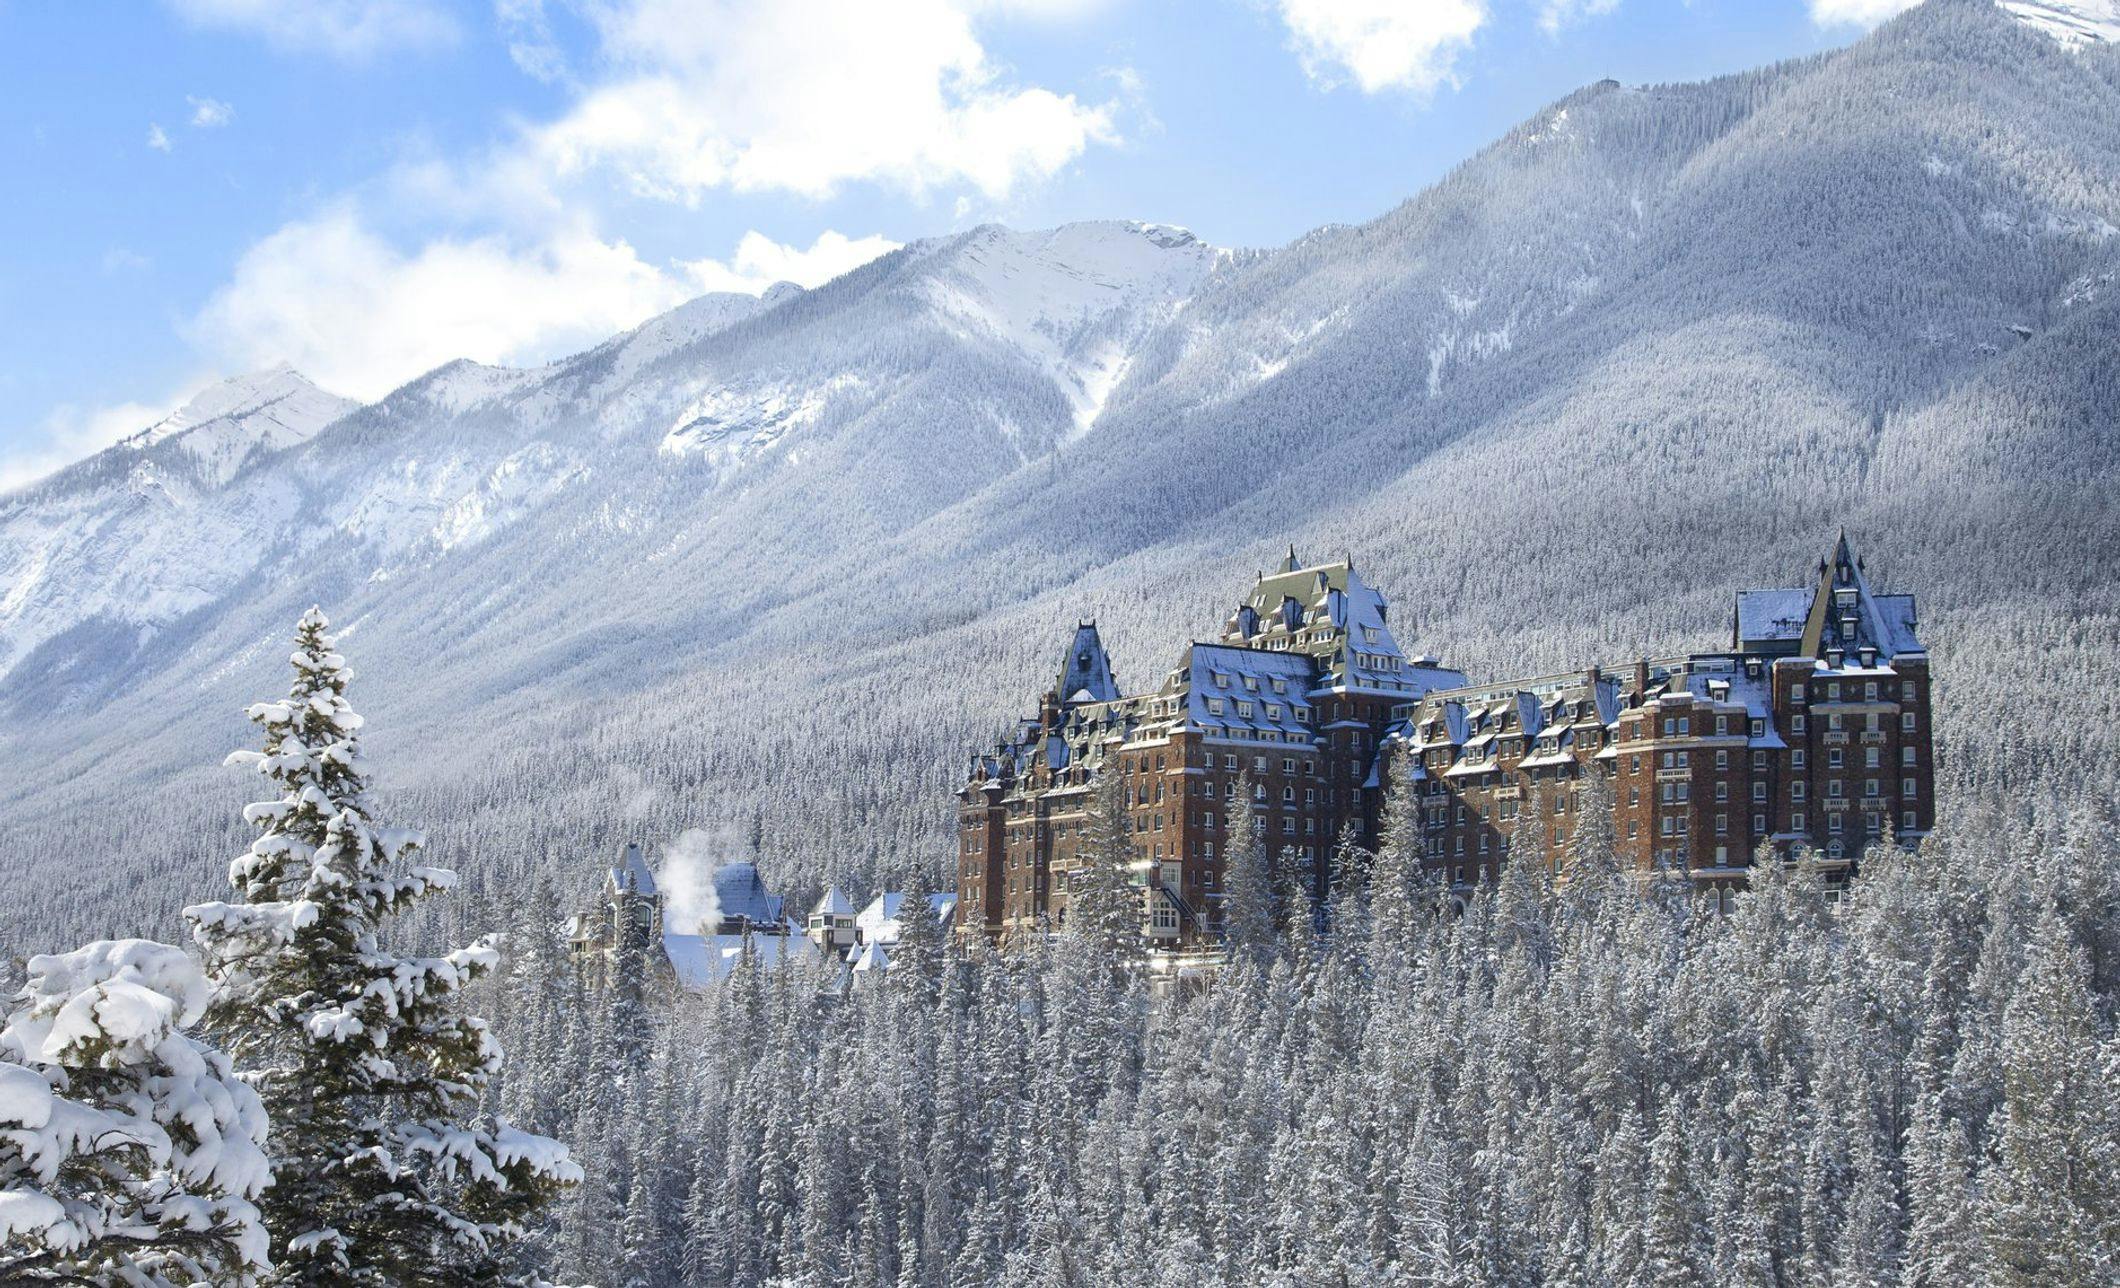 The Castle in the Canadian Rockies - the Fairmont Banff Springs - surrounded by snow. 